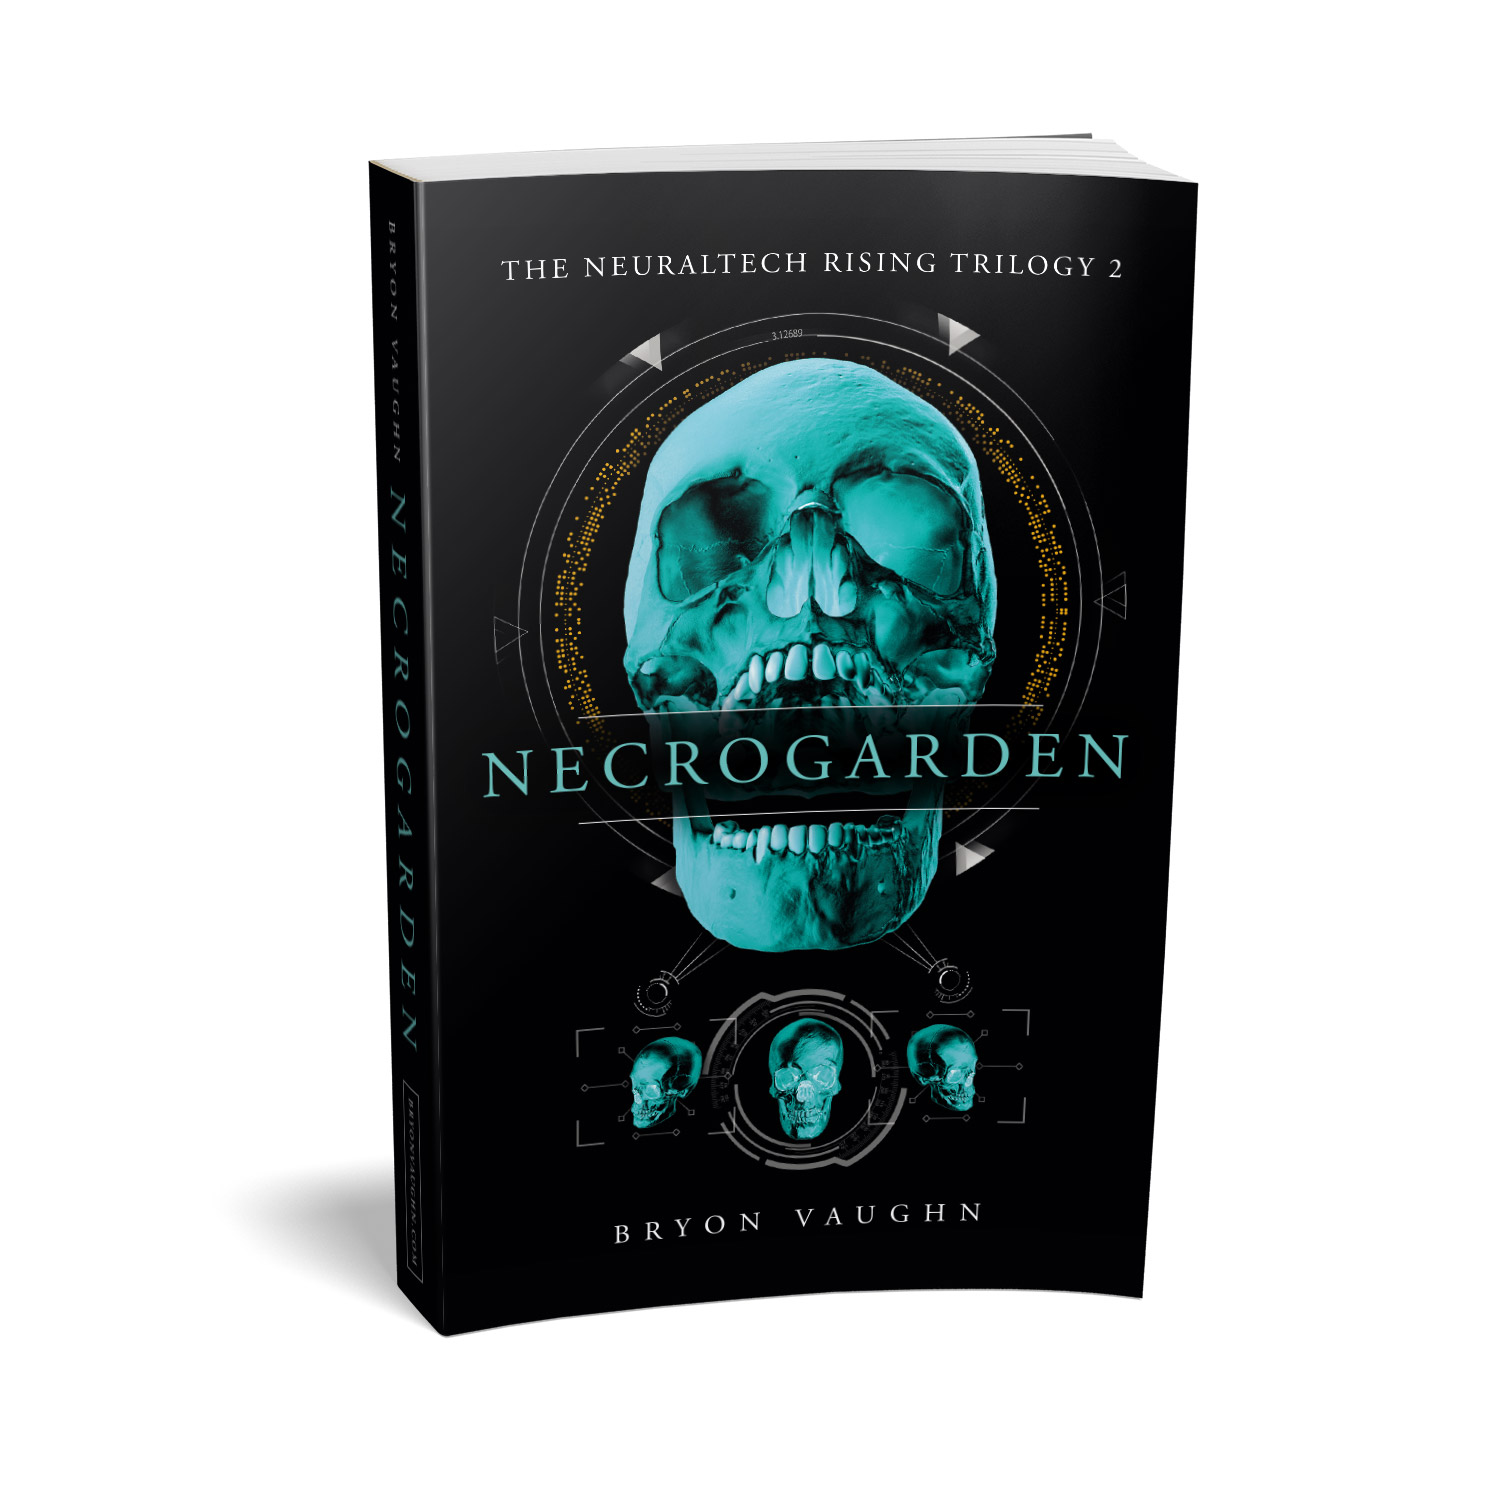 'Necrogarden' is a classy cyber thriller by author Bryon Vaughn. The book cover design is by Mark Thomas. To learn more about what Mark could do for your book, please visit coverness.com.